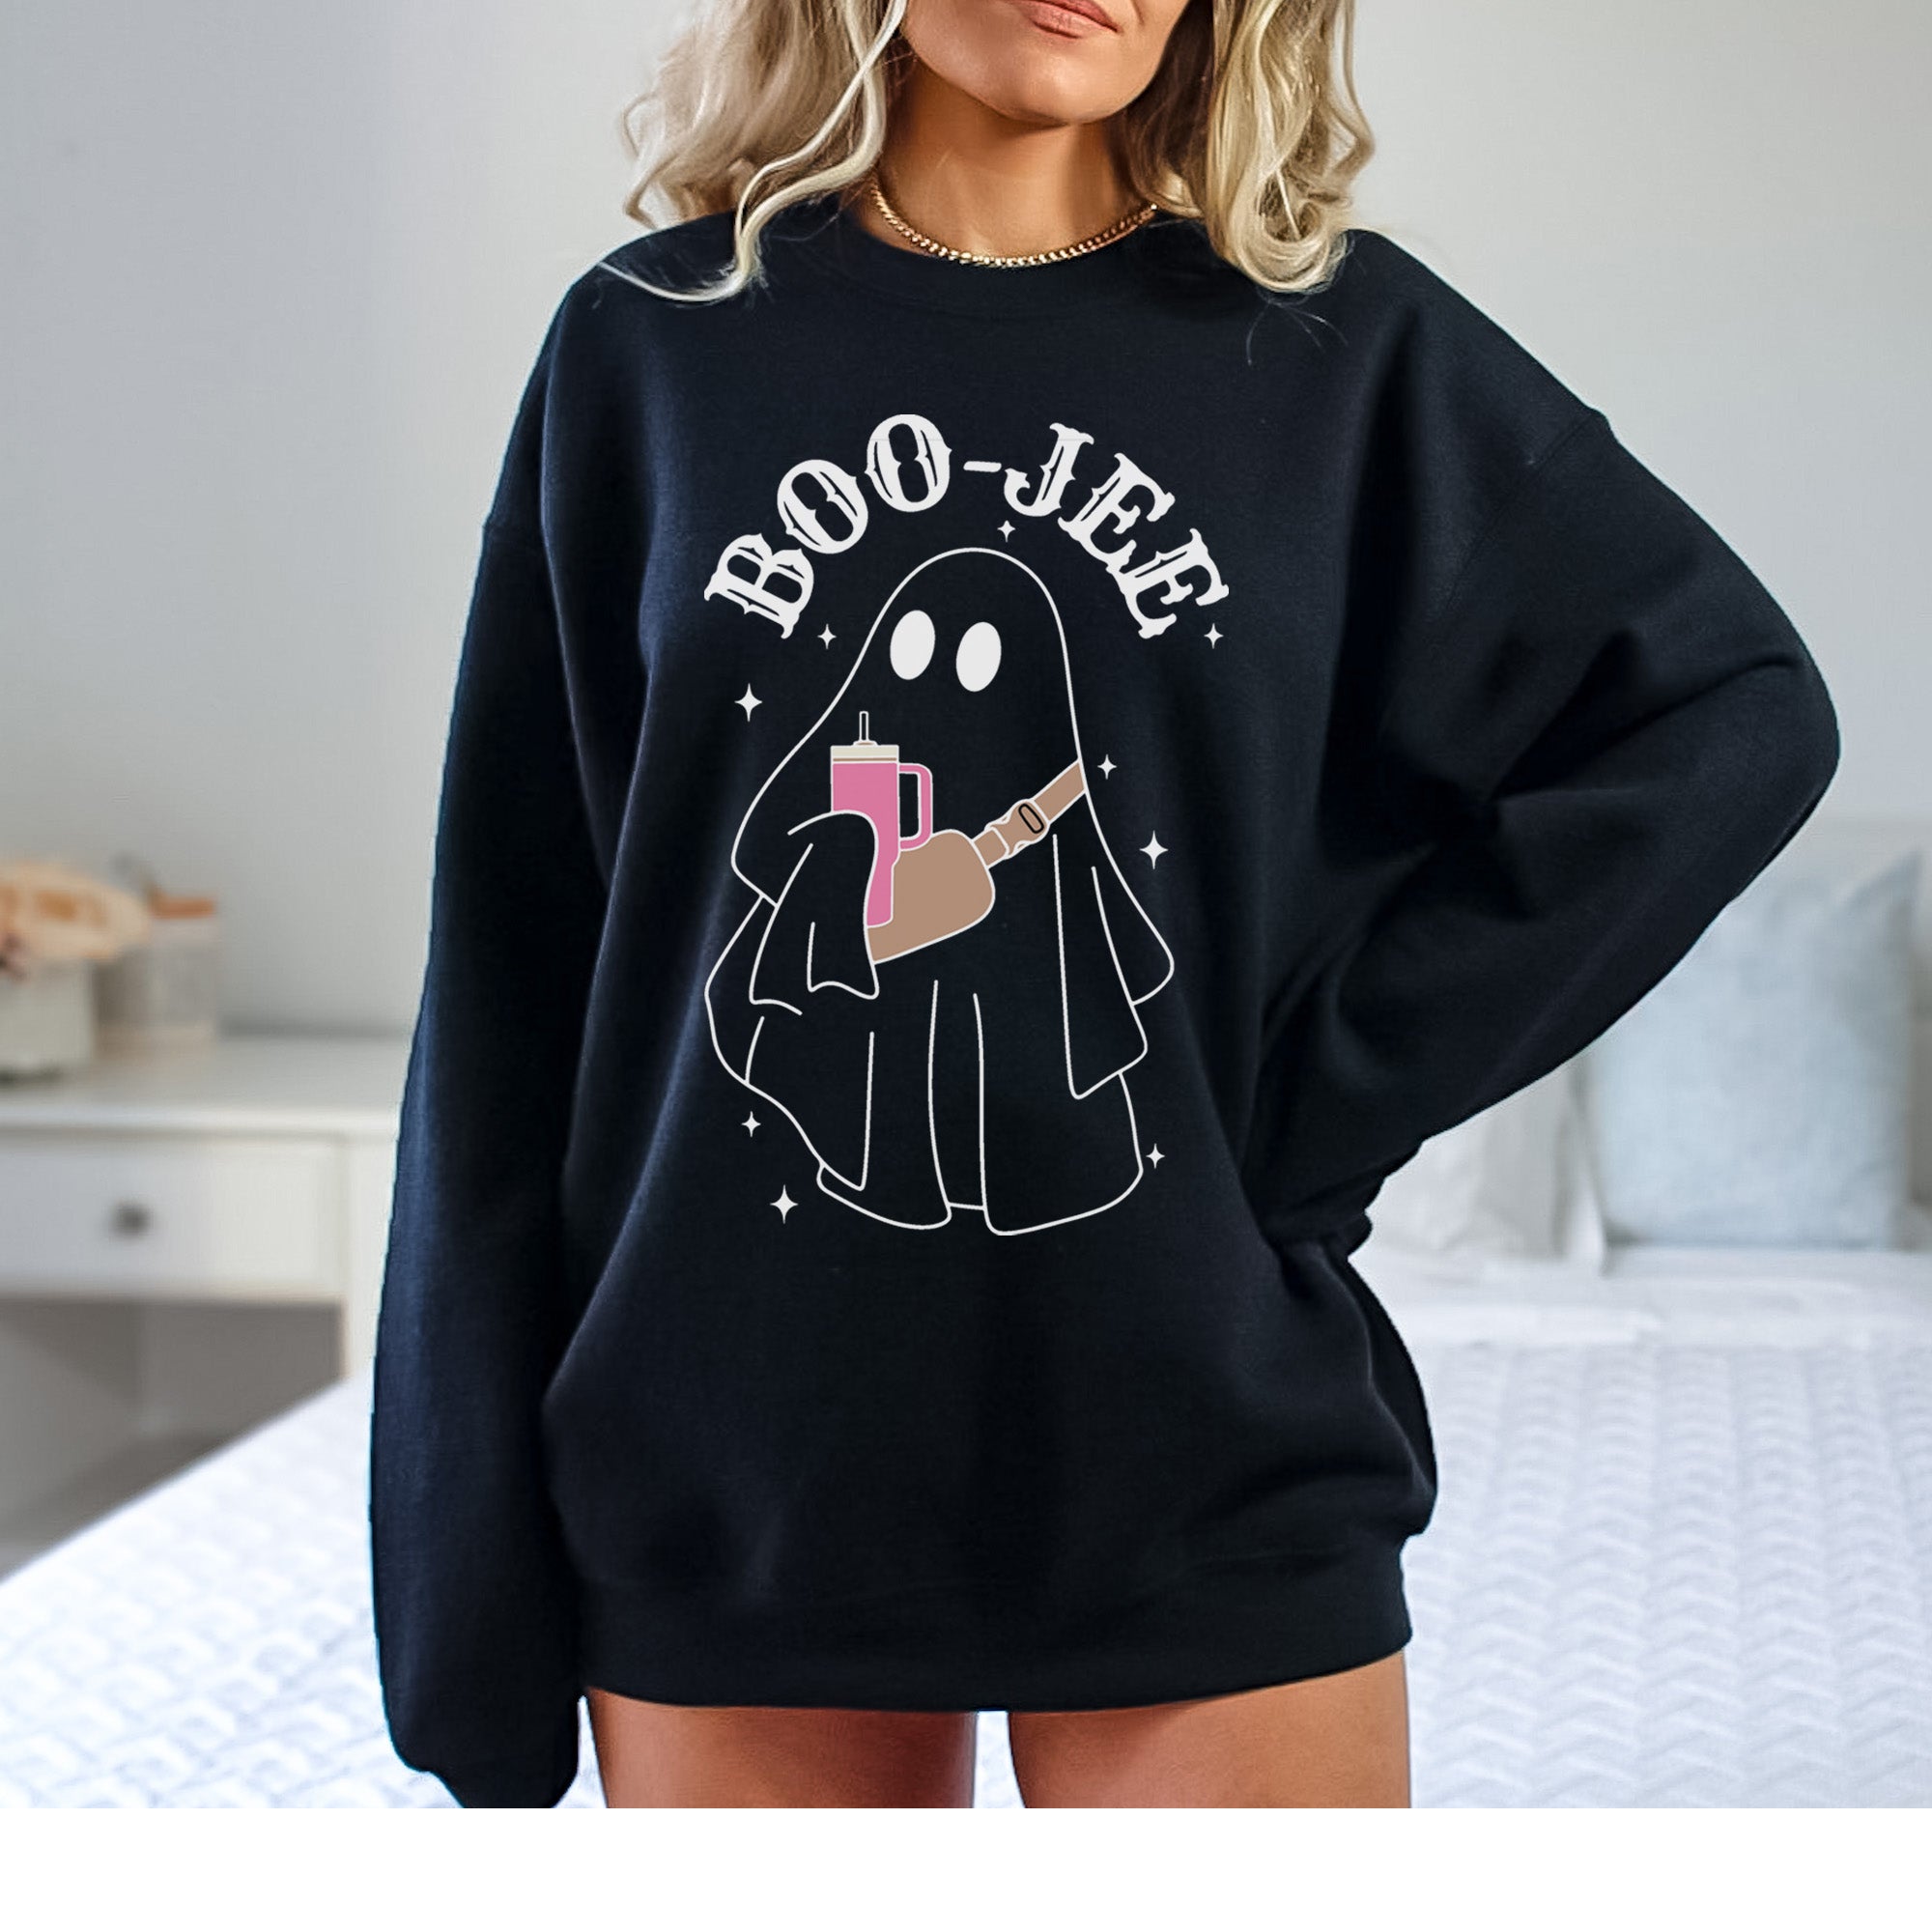 Halloween sweatshirt for women in various colors and sizes. all SKUs